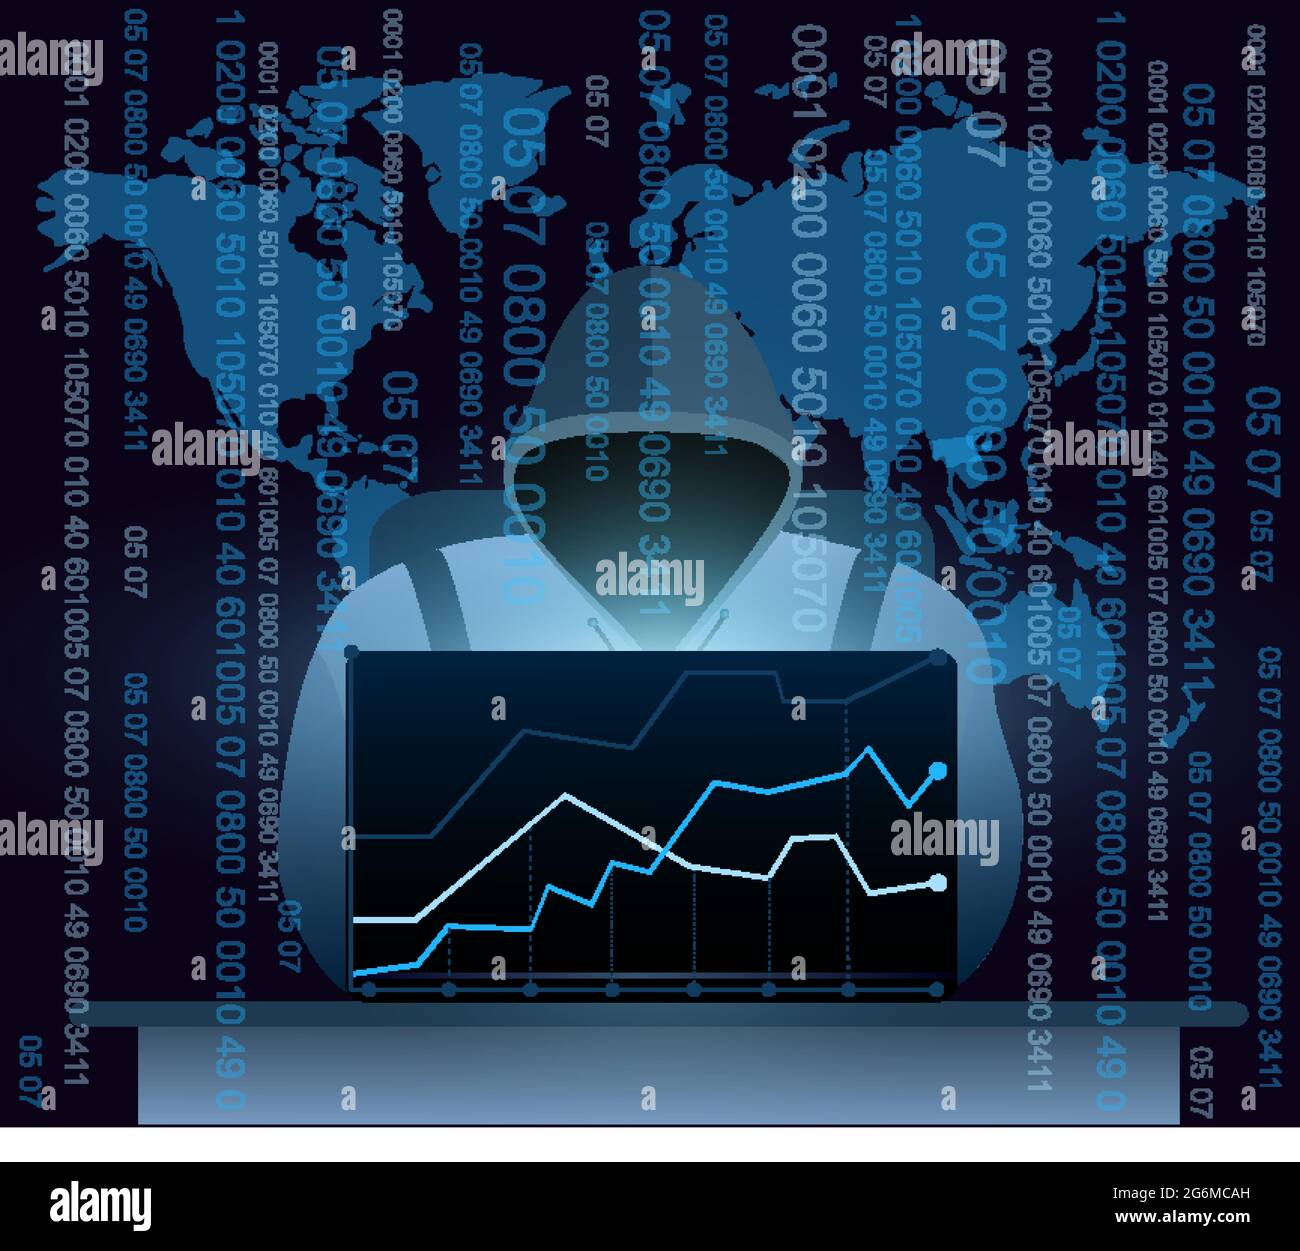 Vector illustration of hacker with laptop, hacking the Internet on world map background, computer security concept, email spam with codes in flat Stock Vector